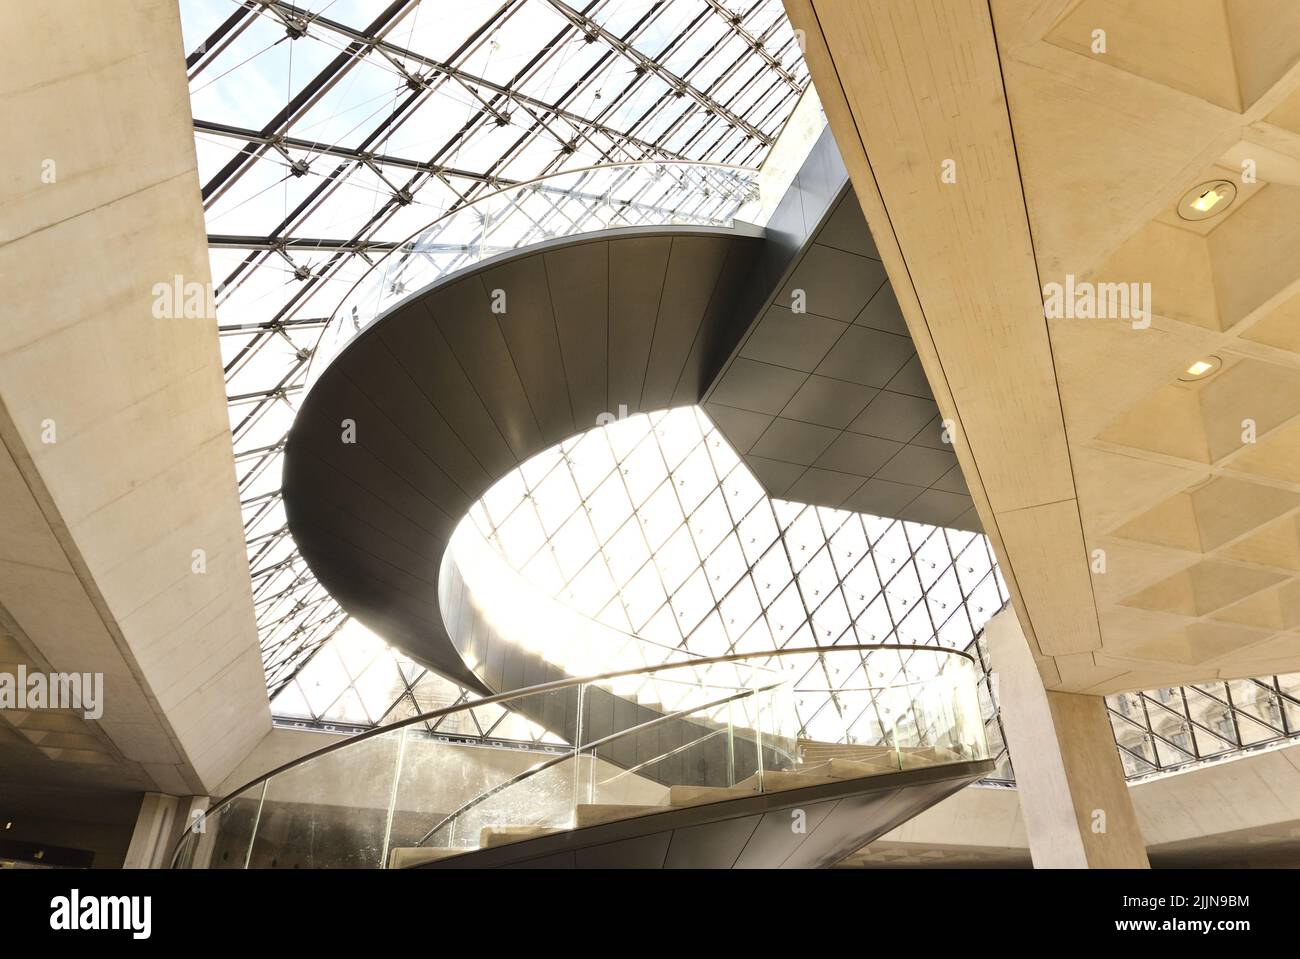 The top part of the glass pyramid and the stairway in the main lobby at the Louvre Museum, Paris, France Stock Photo